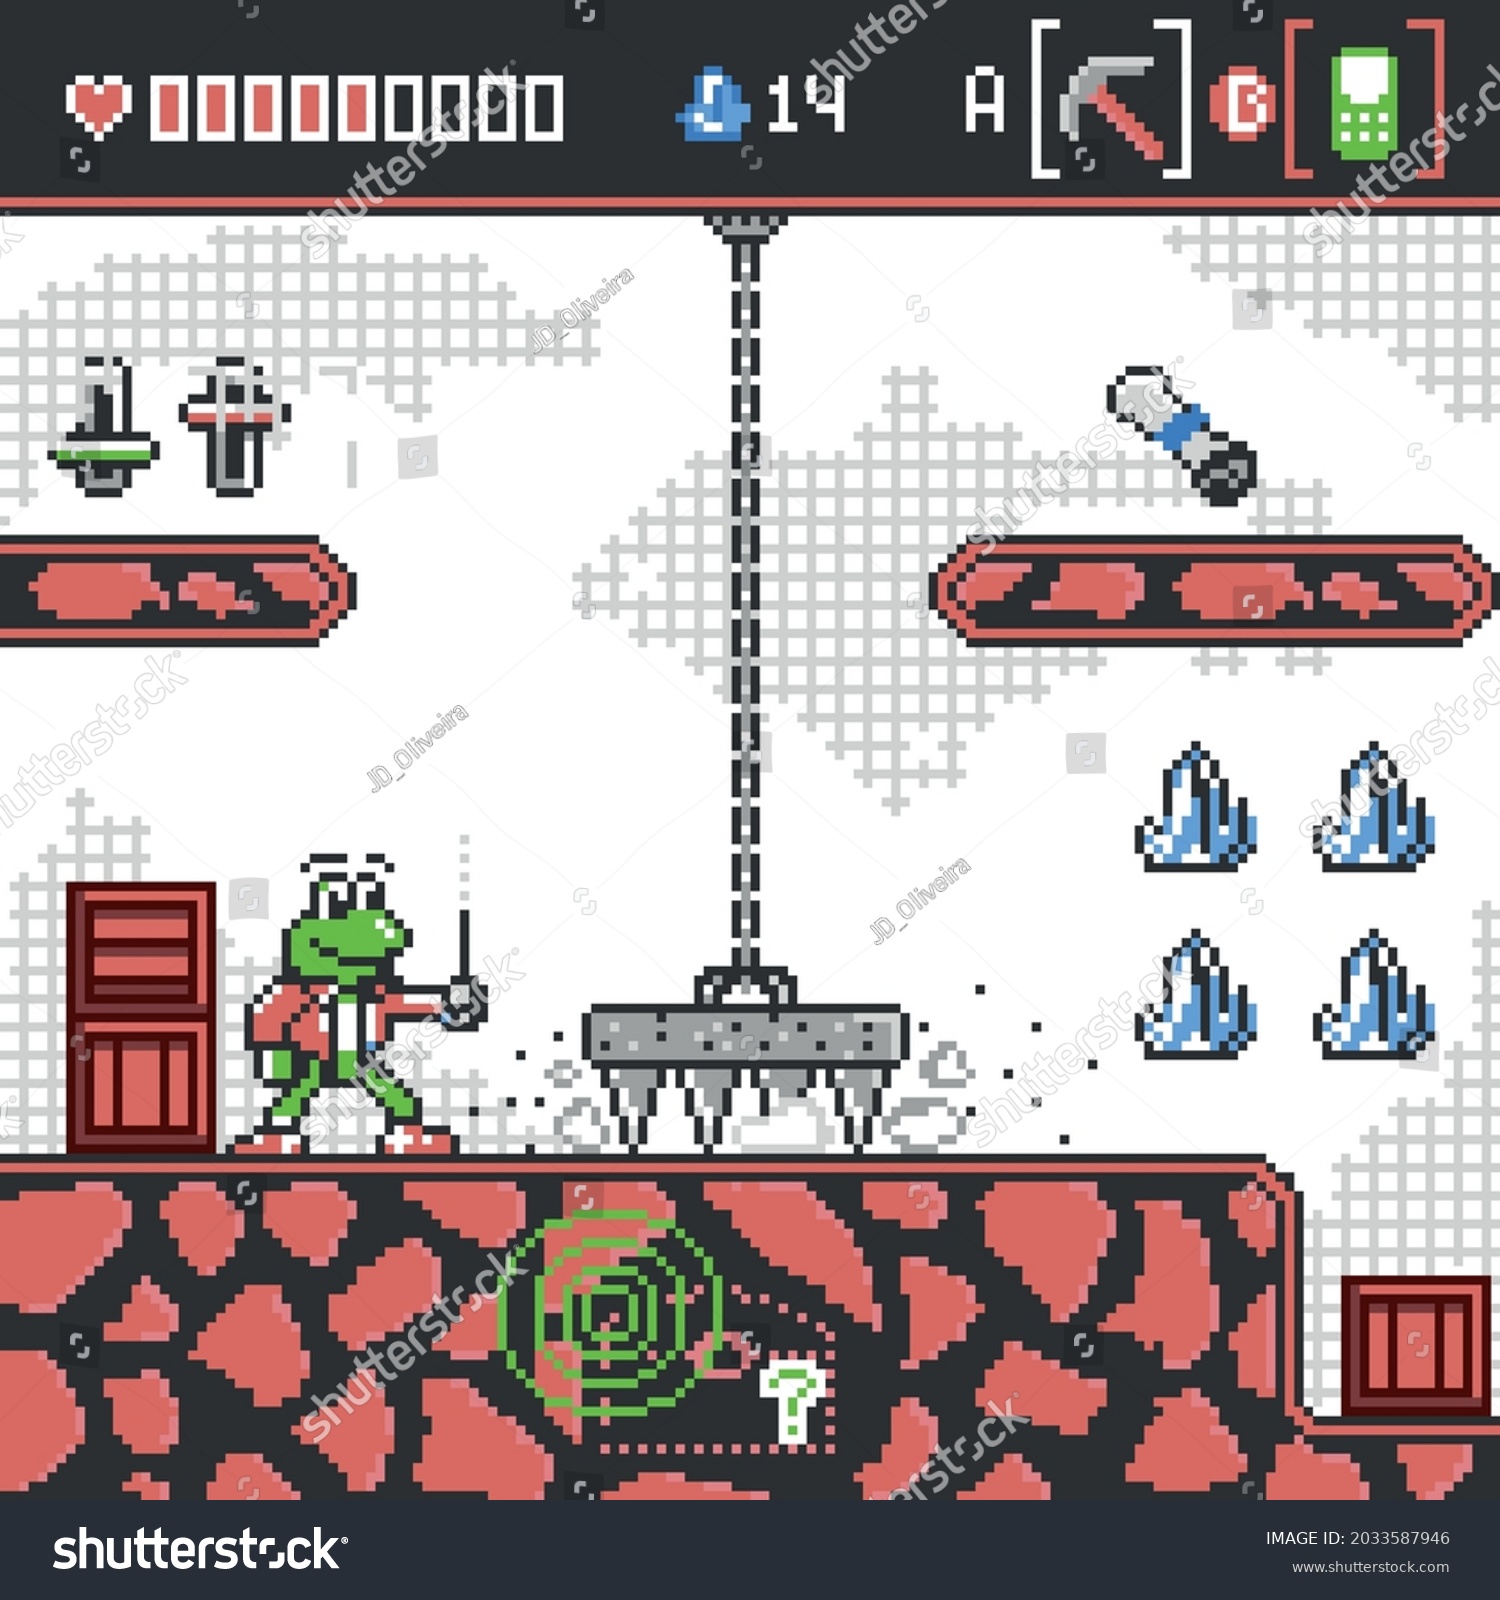 SVG of Pixel art 8-bit style funny plataform adventure game interface. Abandoned Mine level design with levers, boxes, secret map, diamonds and traps. The funny protagonist is an curious detective frog. svg